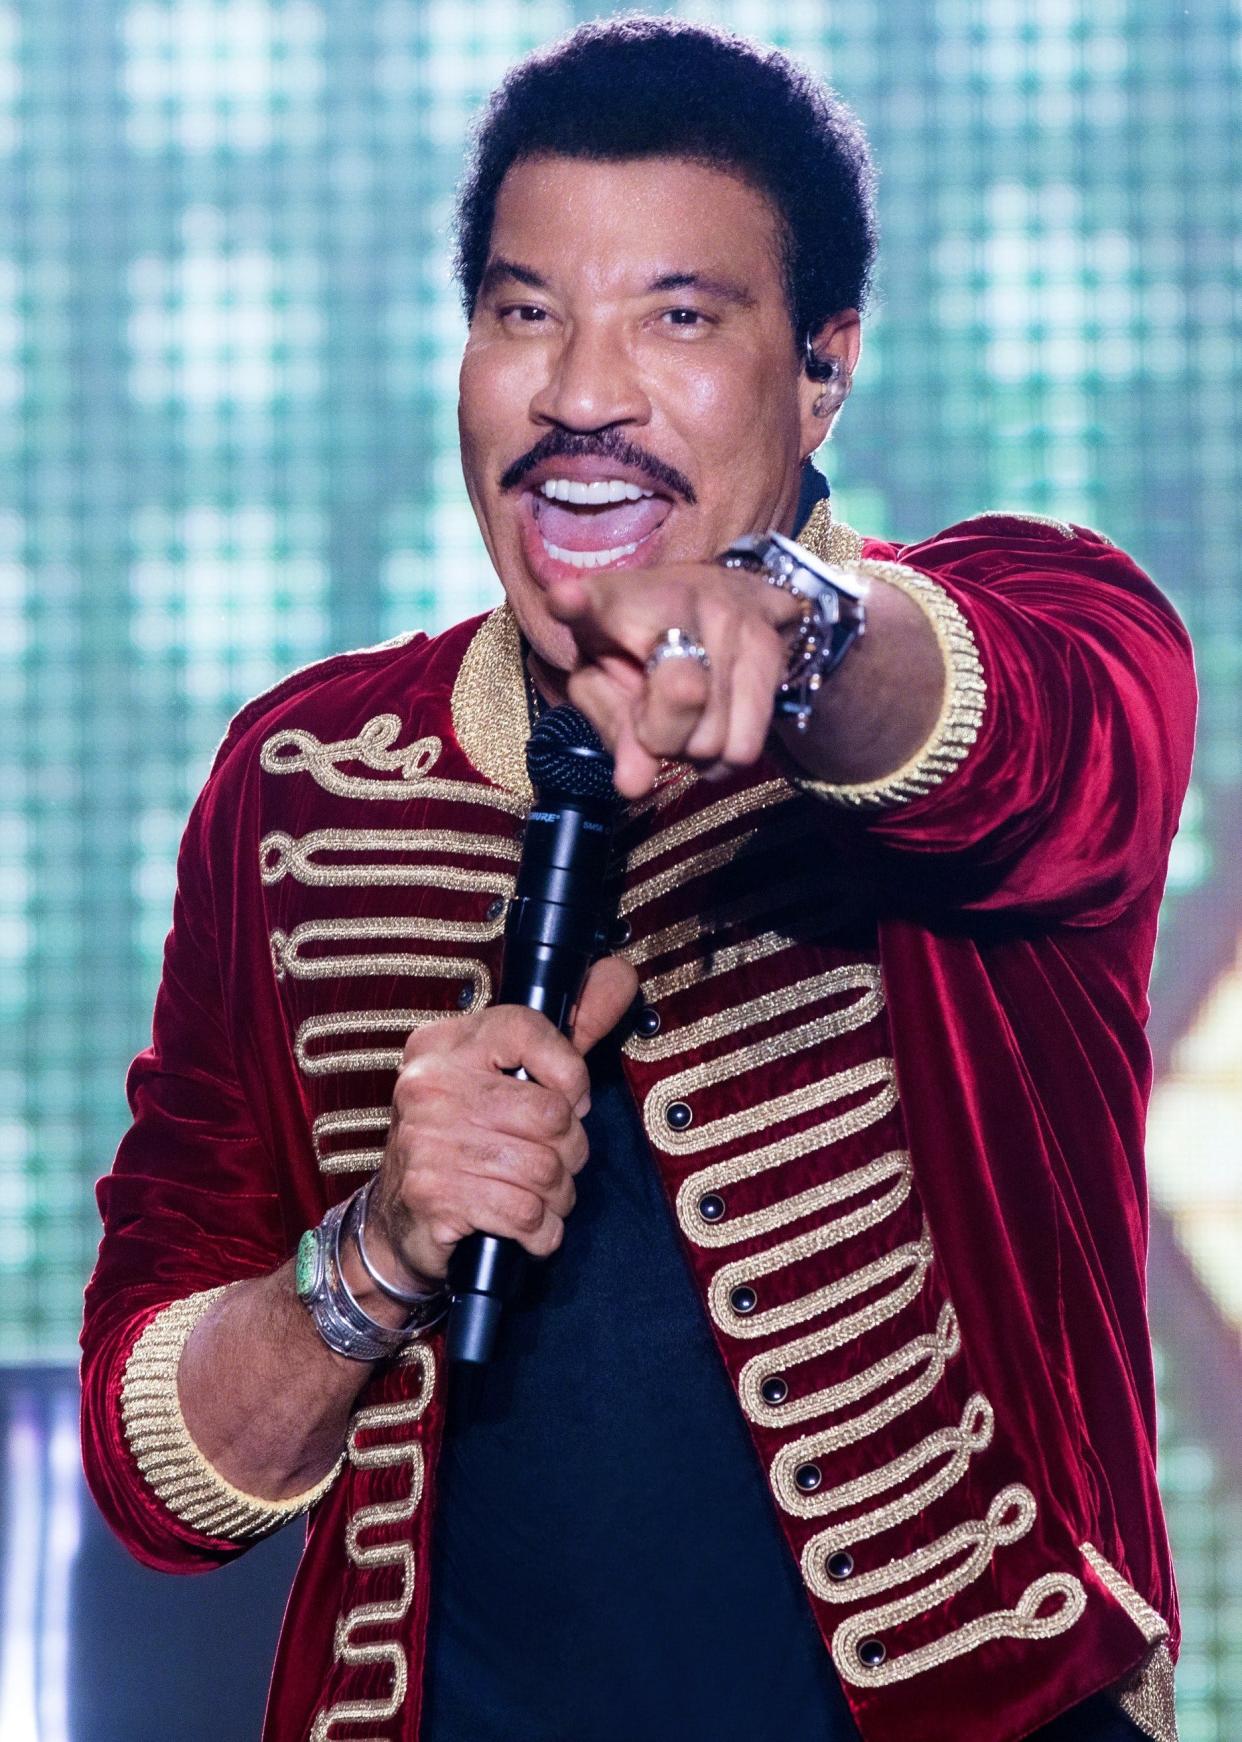 Singer, songwriter and producer Lionel Richie will bring his tour, featuring Earth, Wind & Fire, to FedExForum on May 29.